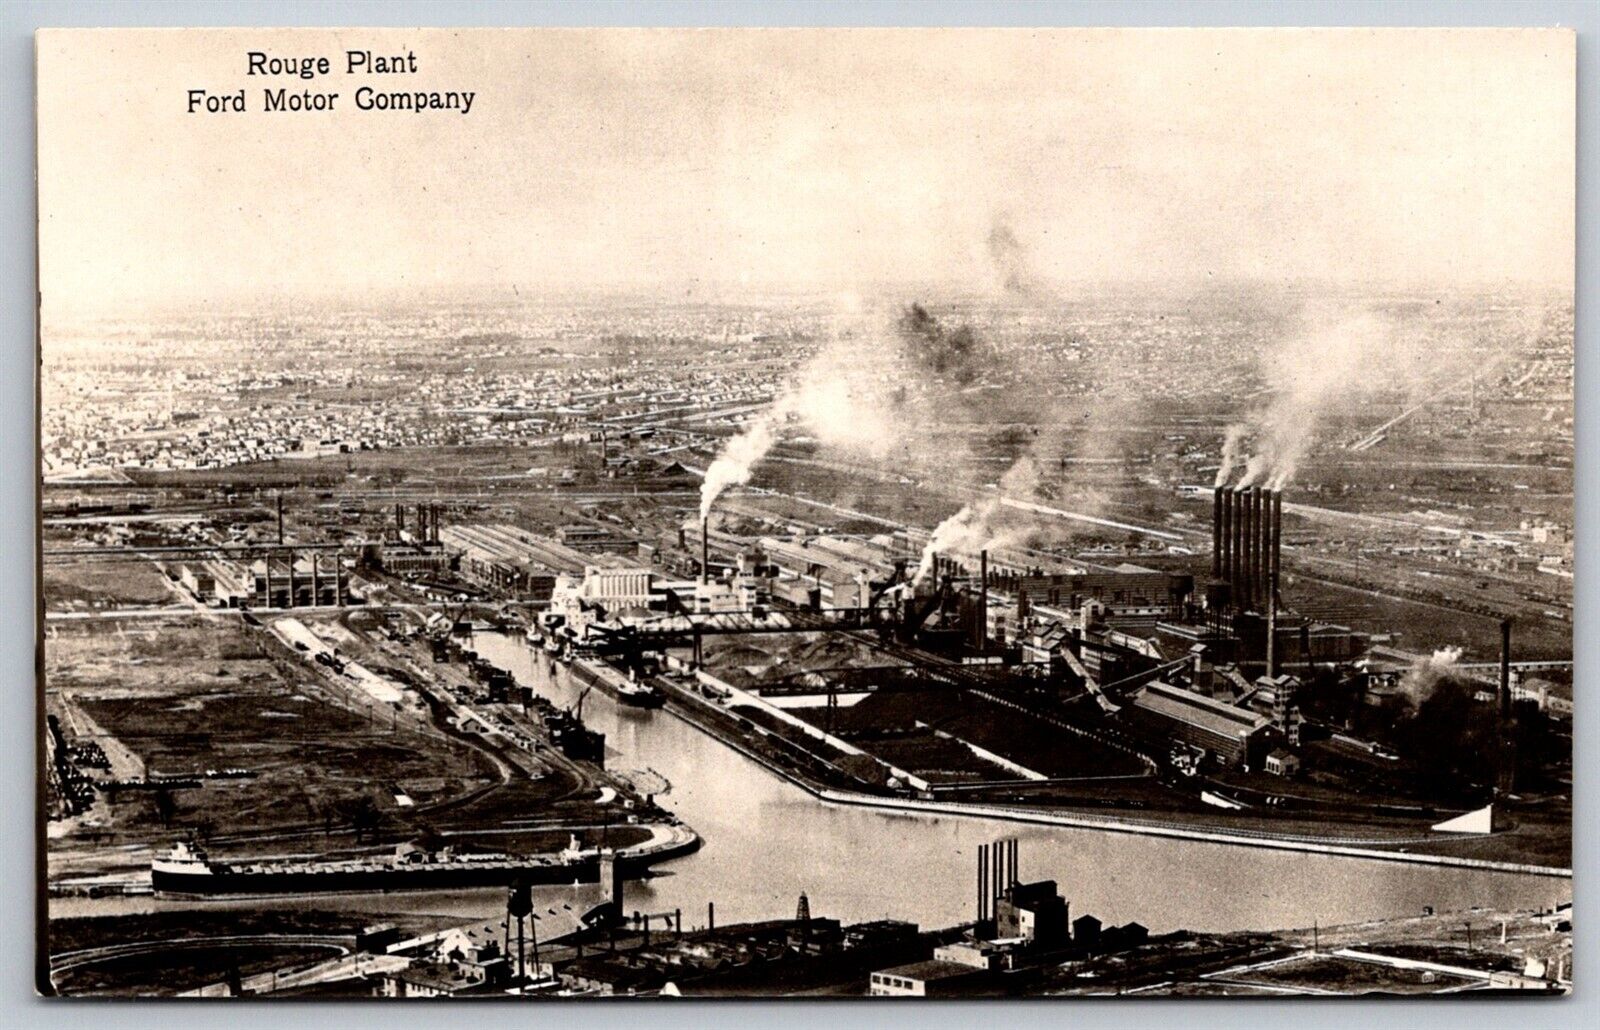 Dearborn Michigan The Rouge Plant Ford Motor Company RPPC Postcard Aerial View 